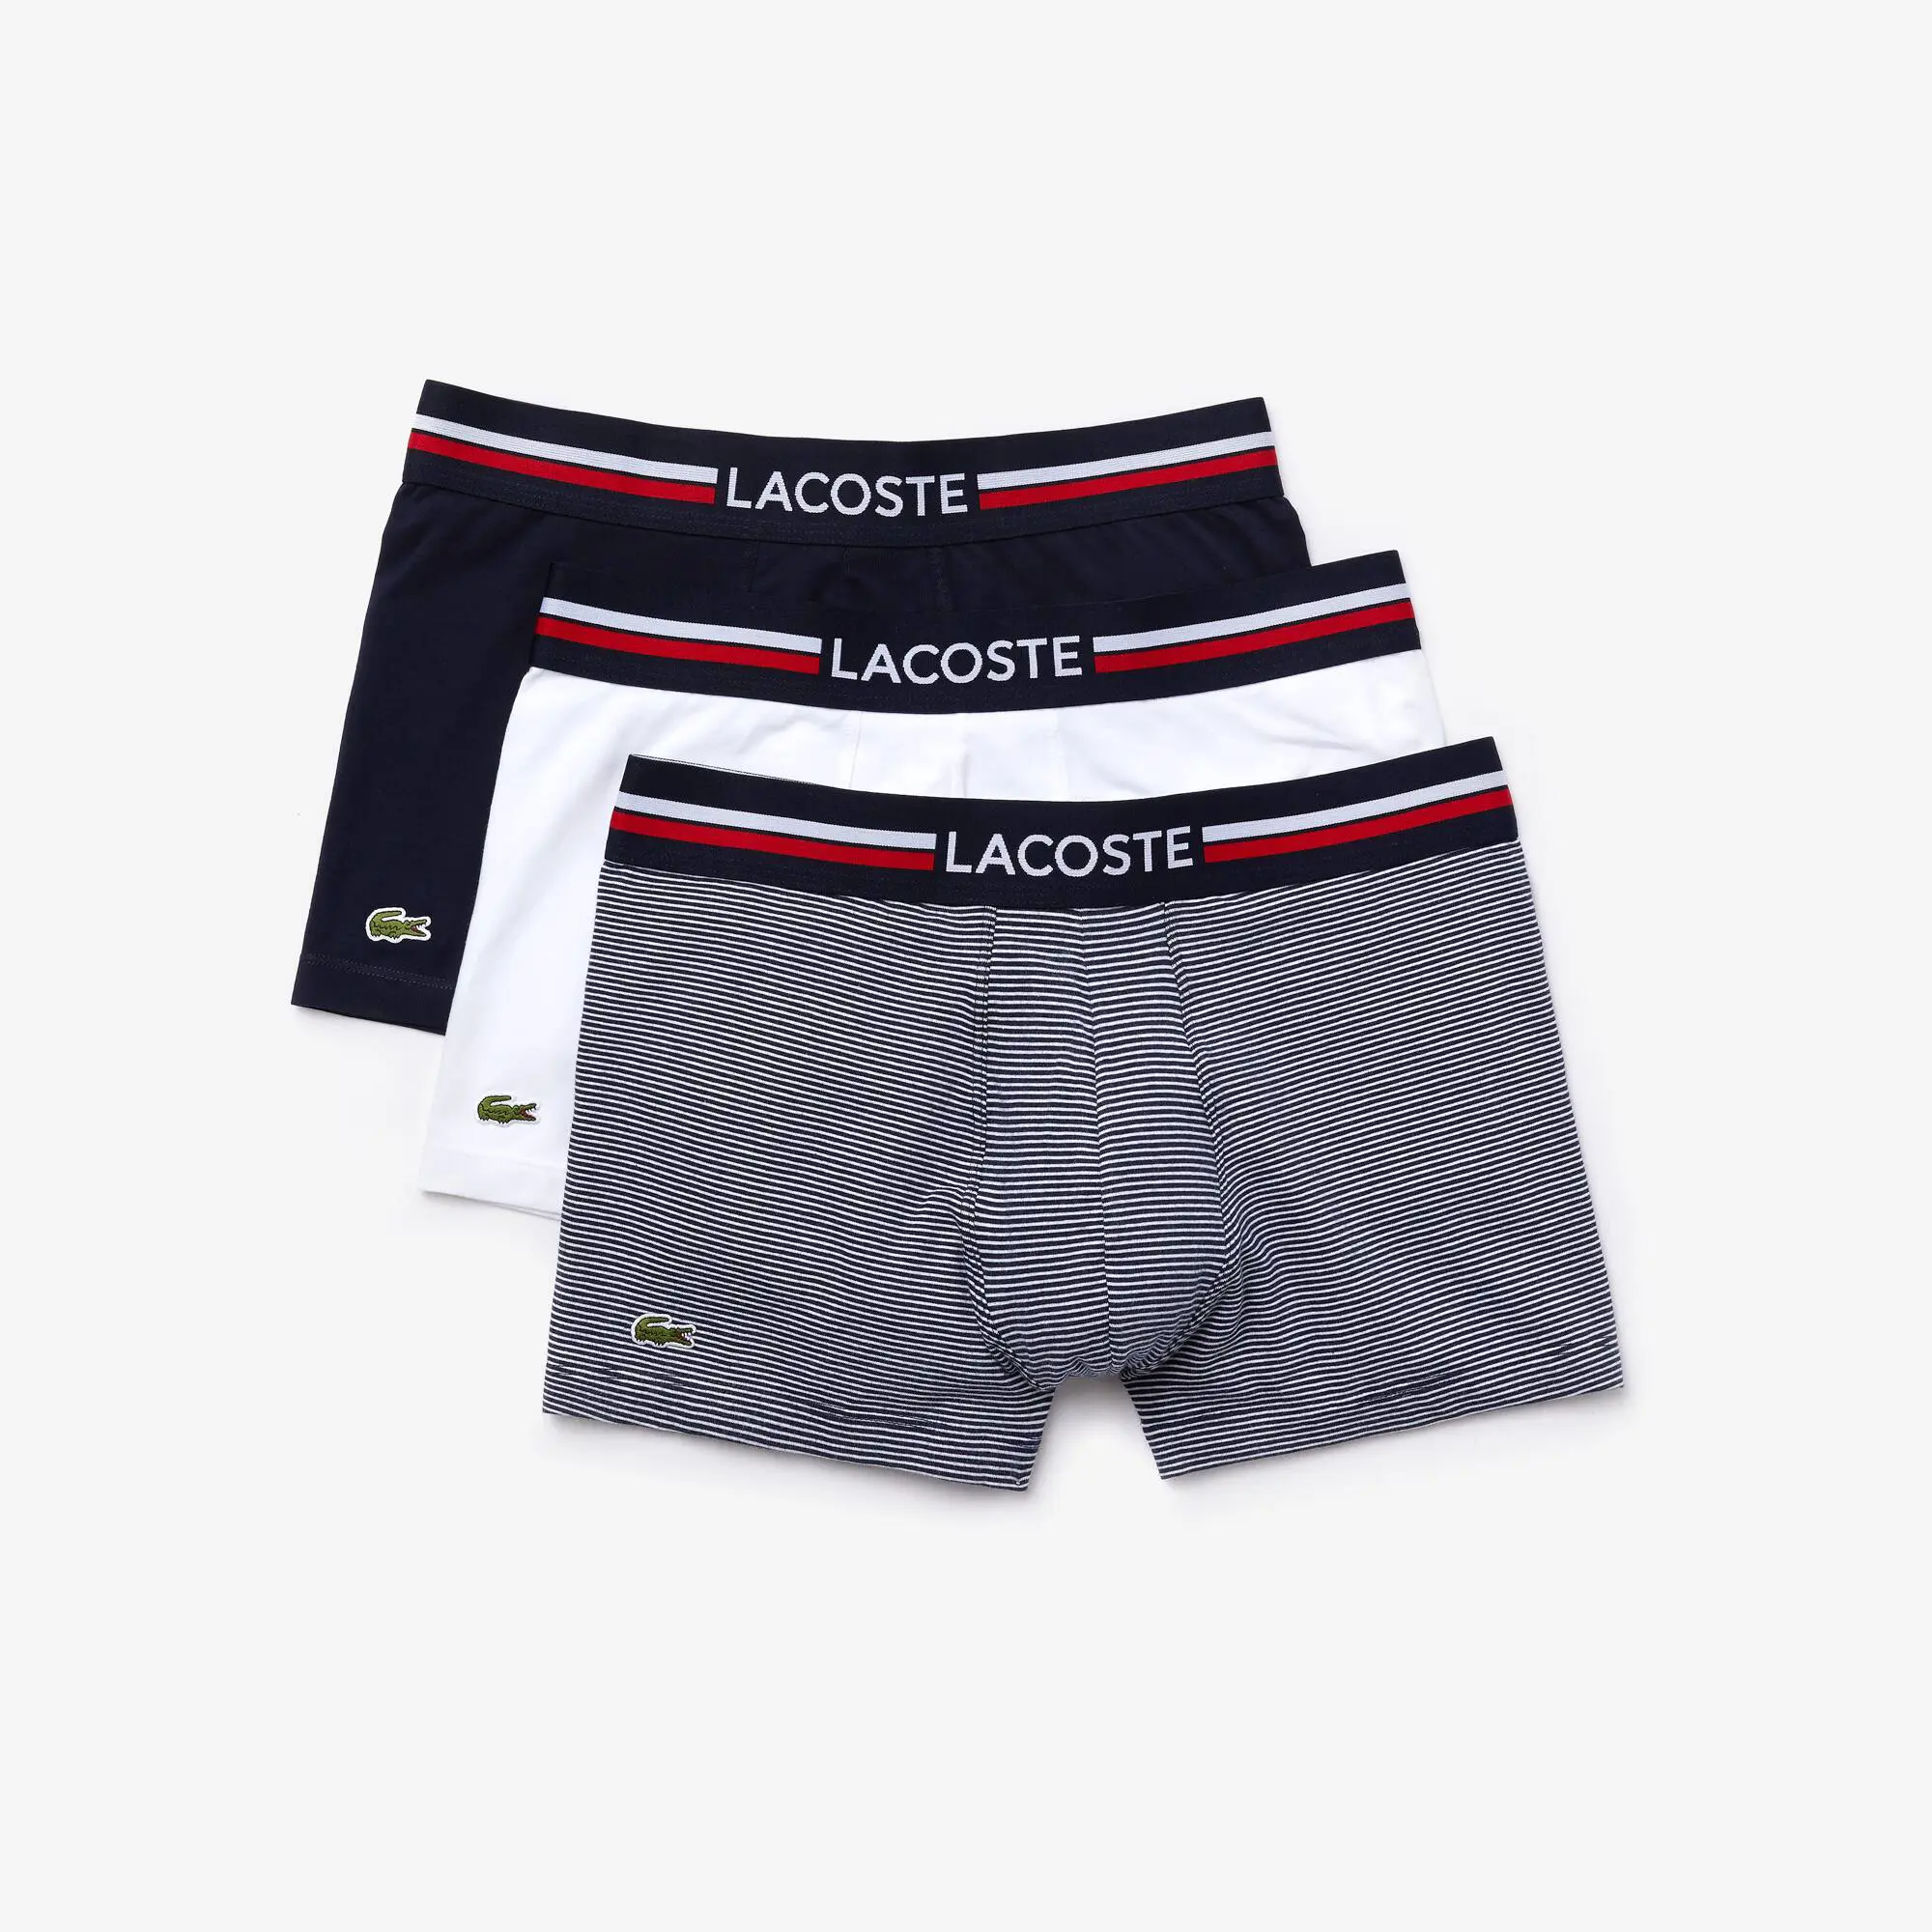 Lacoste Pack Of 3 Iconic Trunks With Three-Tone Waistband. 2